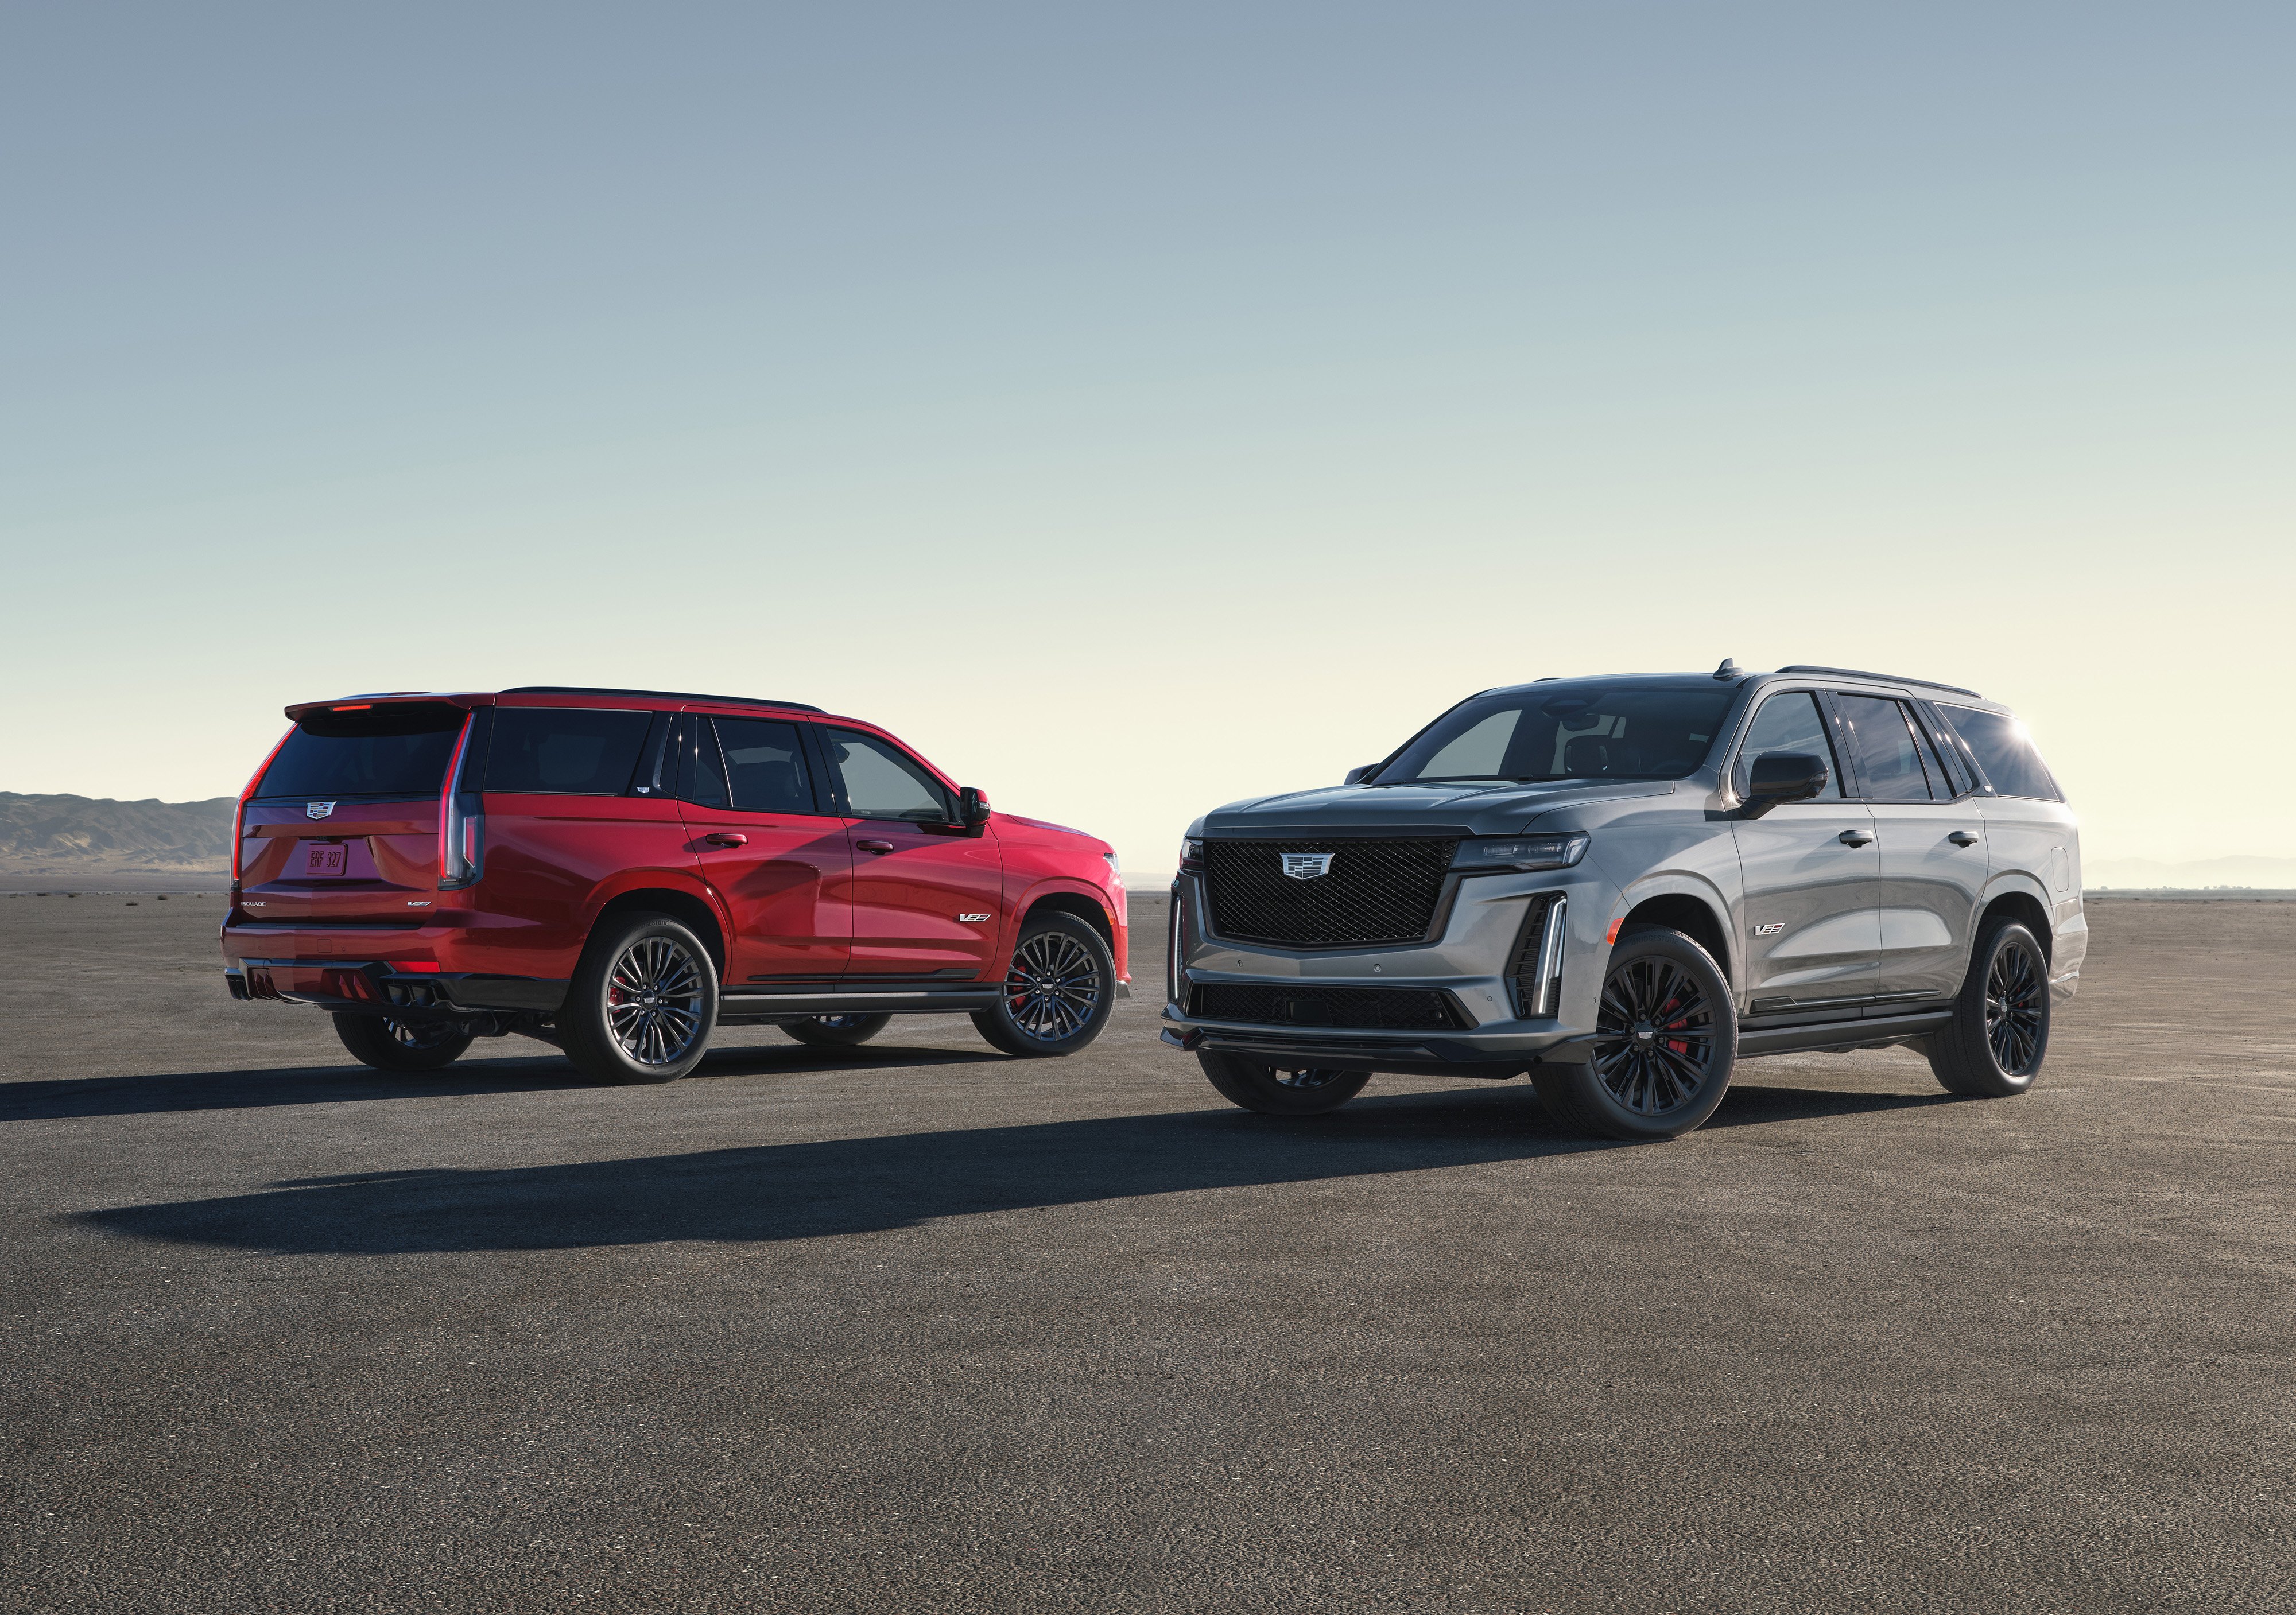 2024 Cadillac Escalade V series versus the competition.